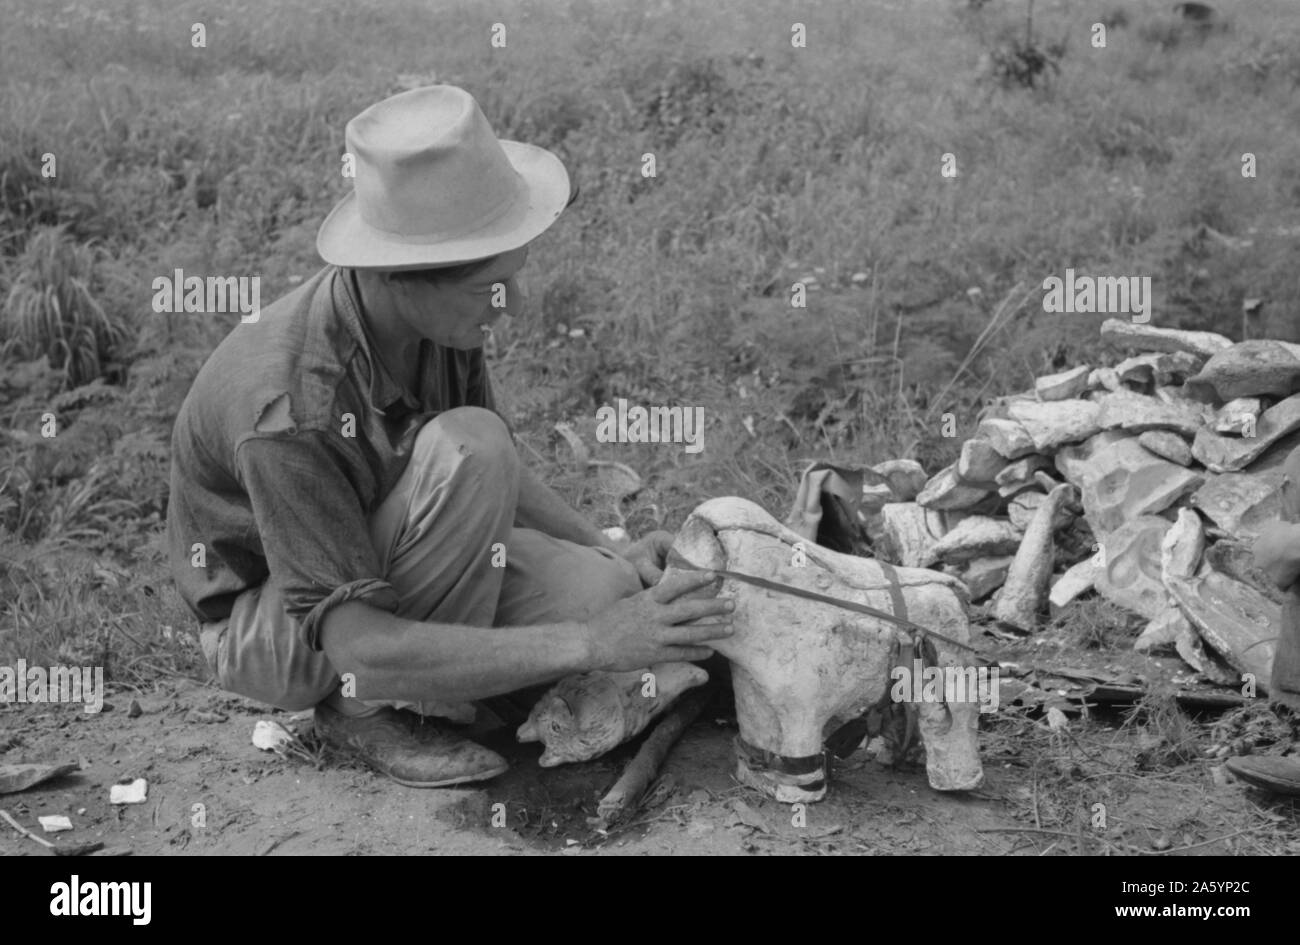 Itinerant statue maker putting together the pieces of a mould for one of his statues. He had been at one time an oil field worker. He said that the WPA (Work Projects Administration) had reduced the possibility of the man on the road getting a job. He said he believed he could farm if he could get a chance. Near Spiro, Oklahoma by Russell lee, 1903-1986, Stock Photo